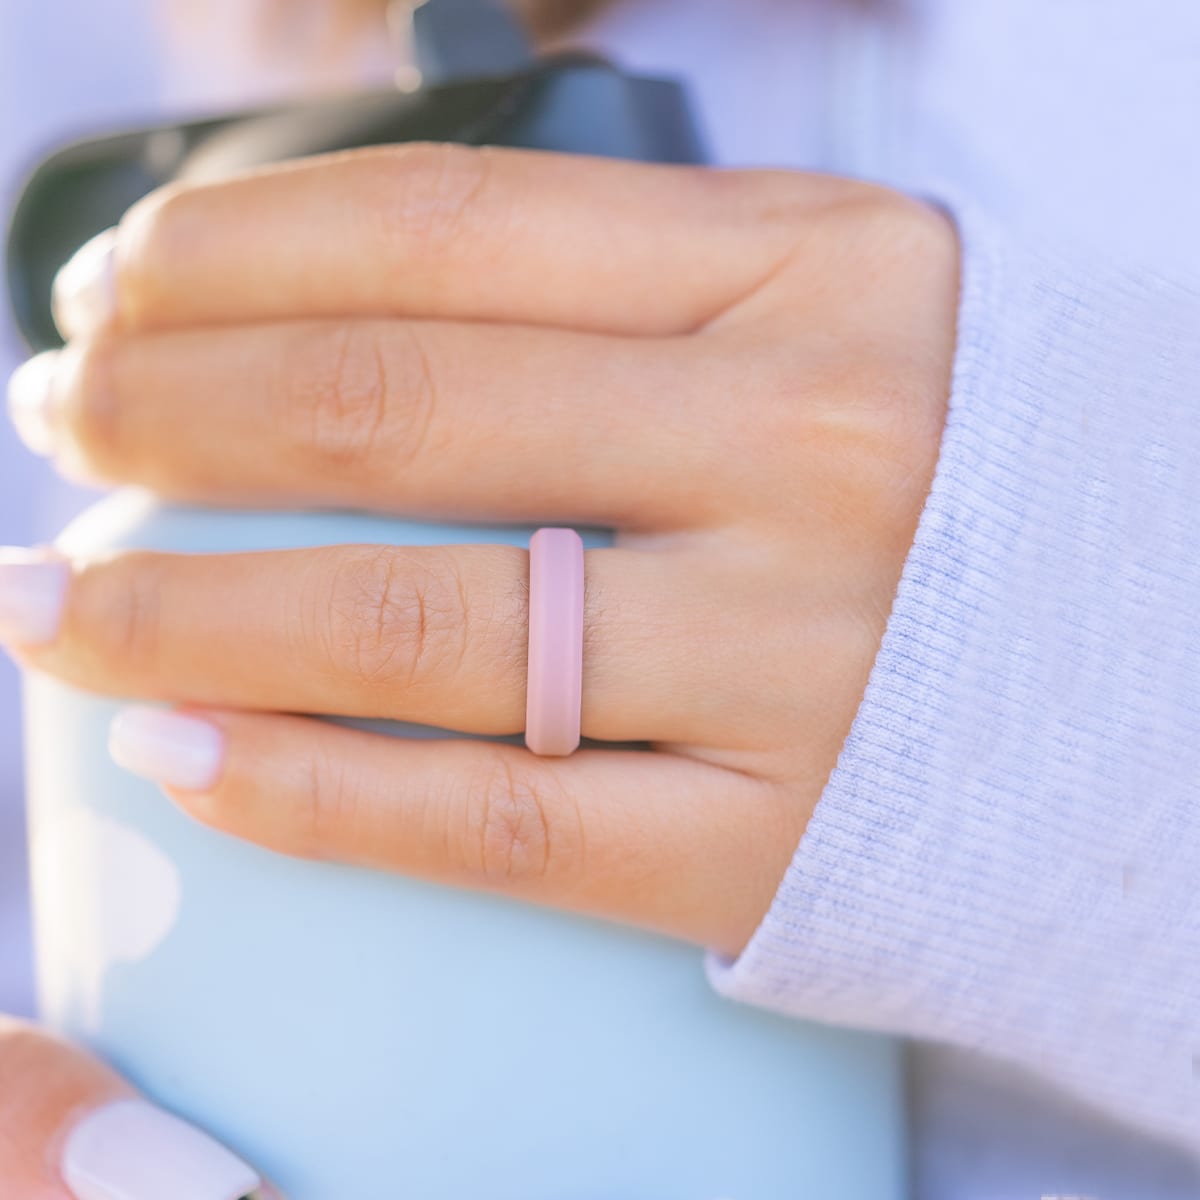 Female hand wearing a pink silicone wedding ring